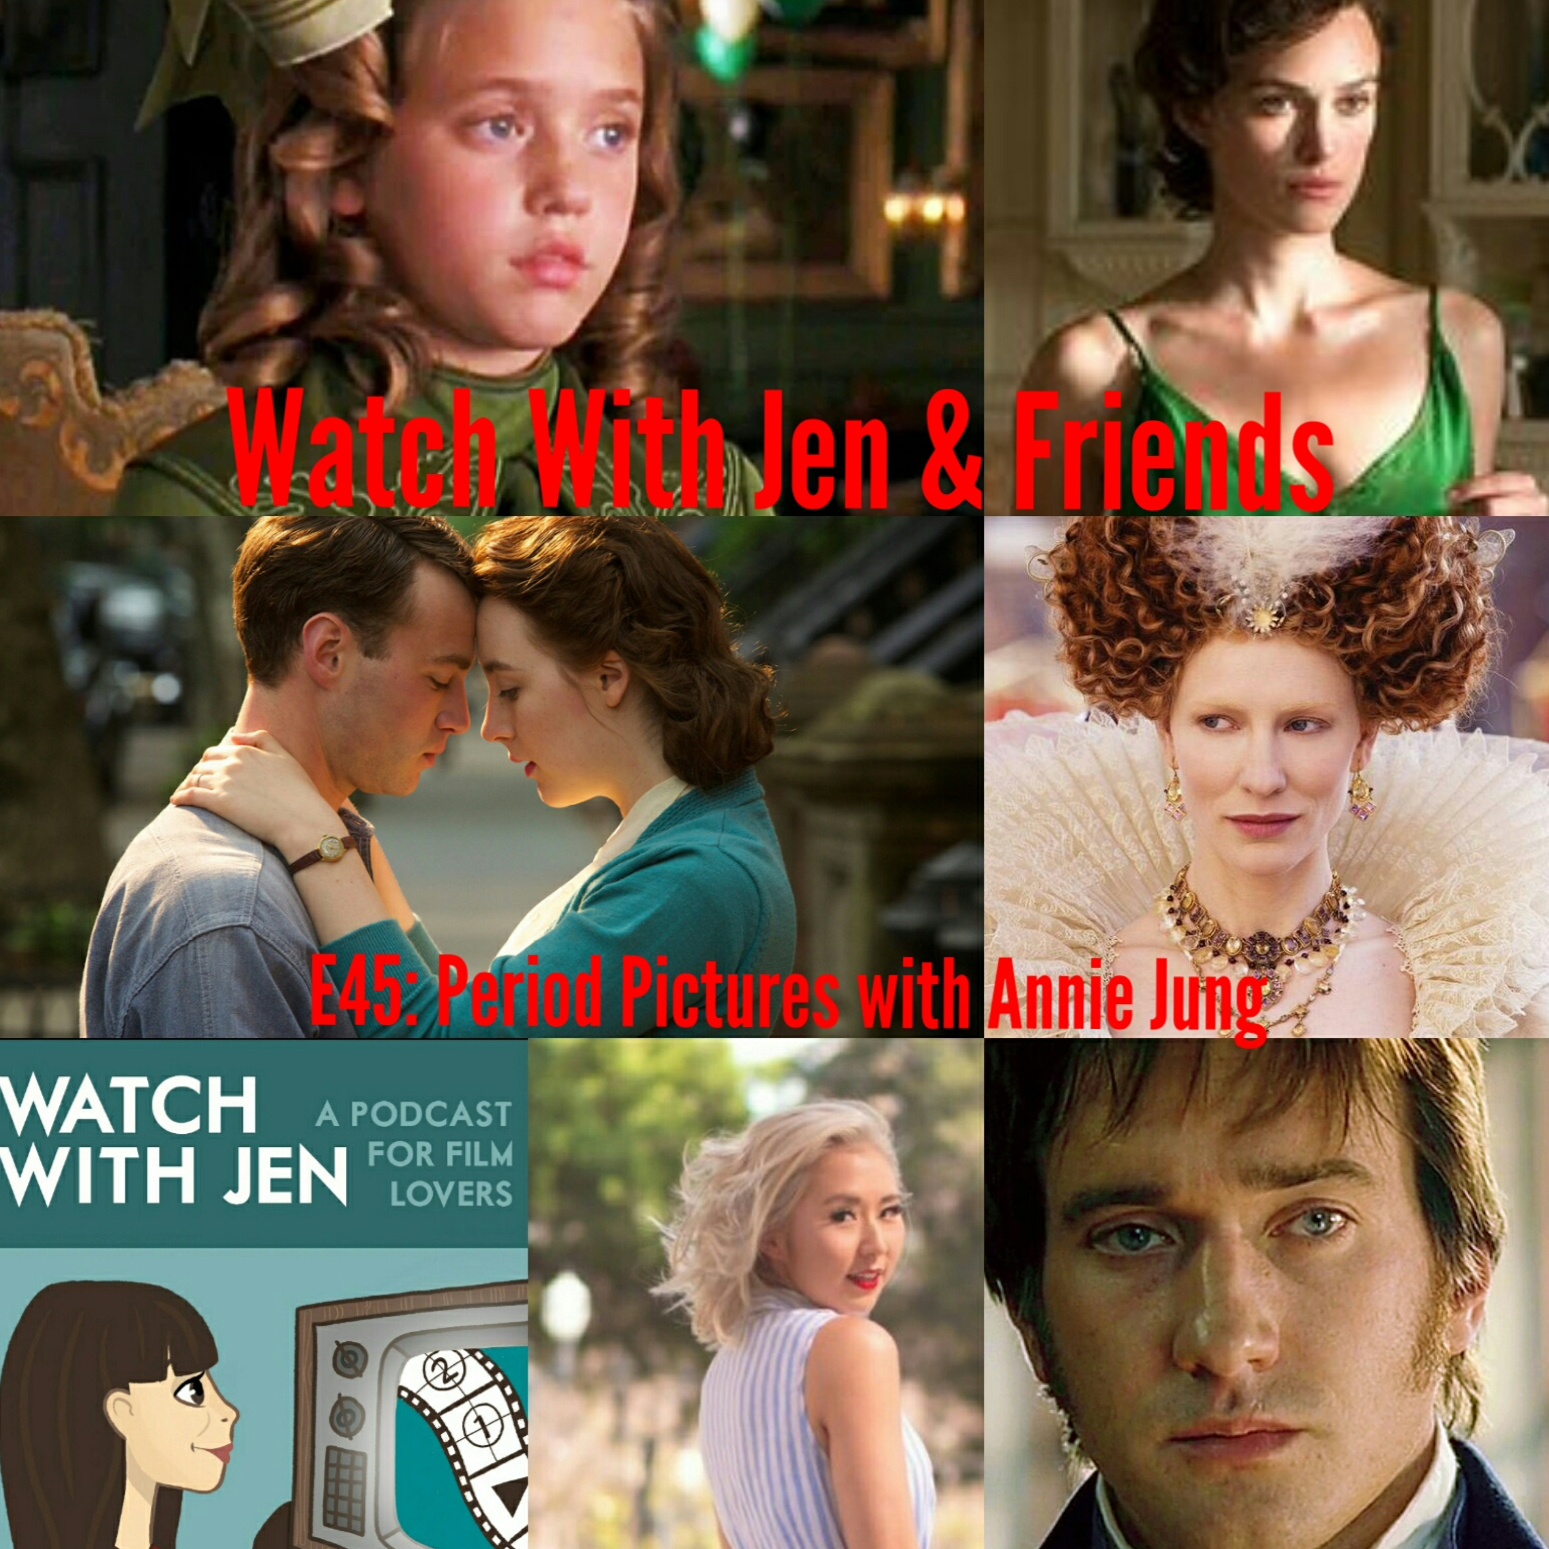 Watch With Jen & Friends: Episode 45 - Period Pictures with Annie Jung